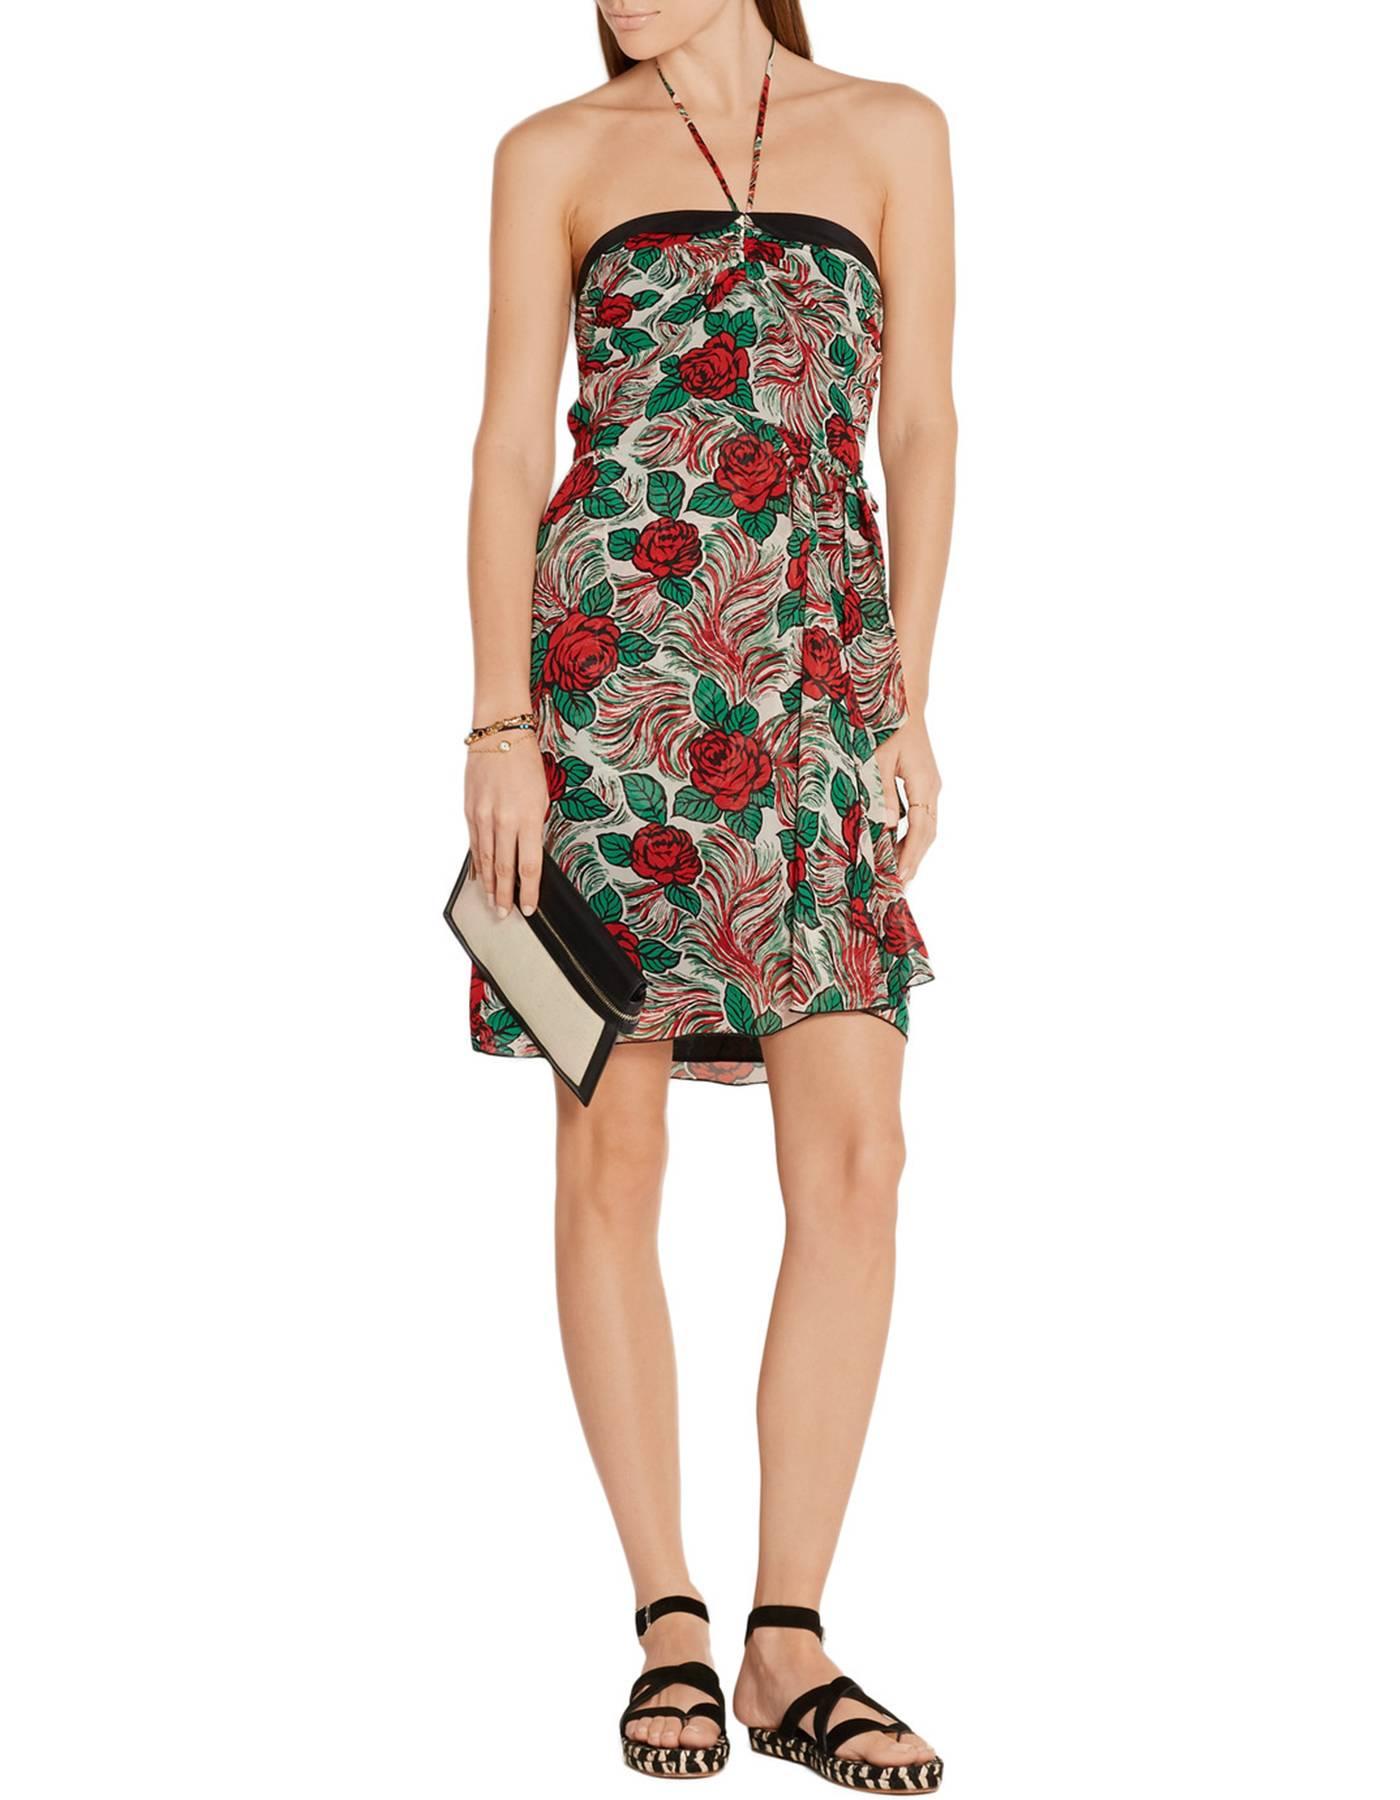 Anna Sui Floral Print Silk Halter Dress 
Features optional flaps at side waist to tie bow

Made In: USA
Color: Black, red, green and white
Composition: 100% silk
Lining: Black, 100% polyester
Closure/Opening: Side zipper and halter tie neck
Exterior